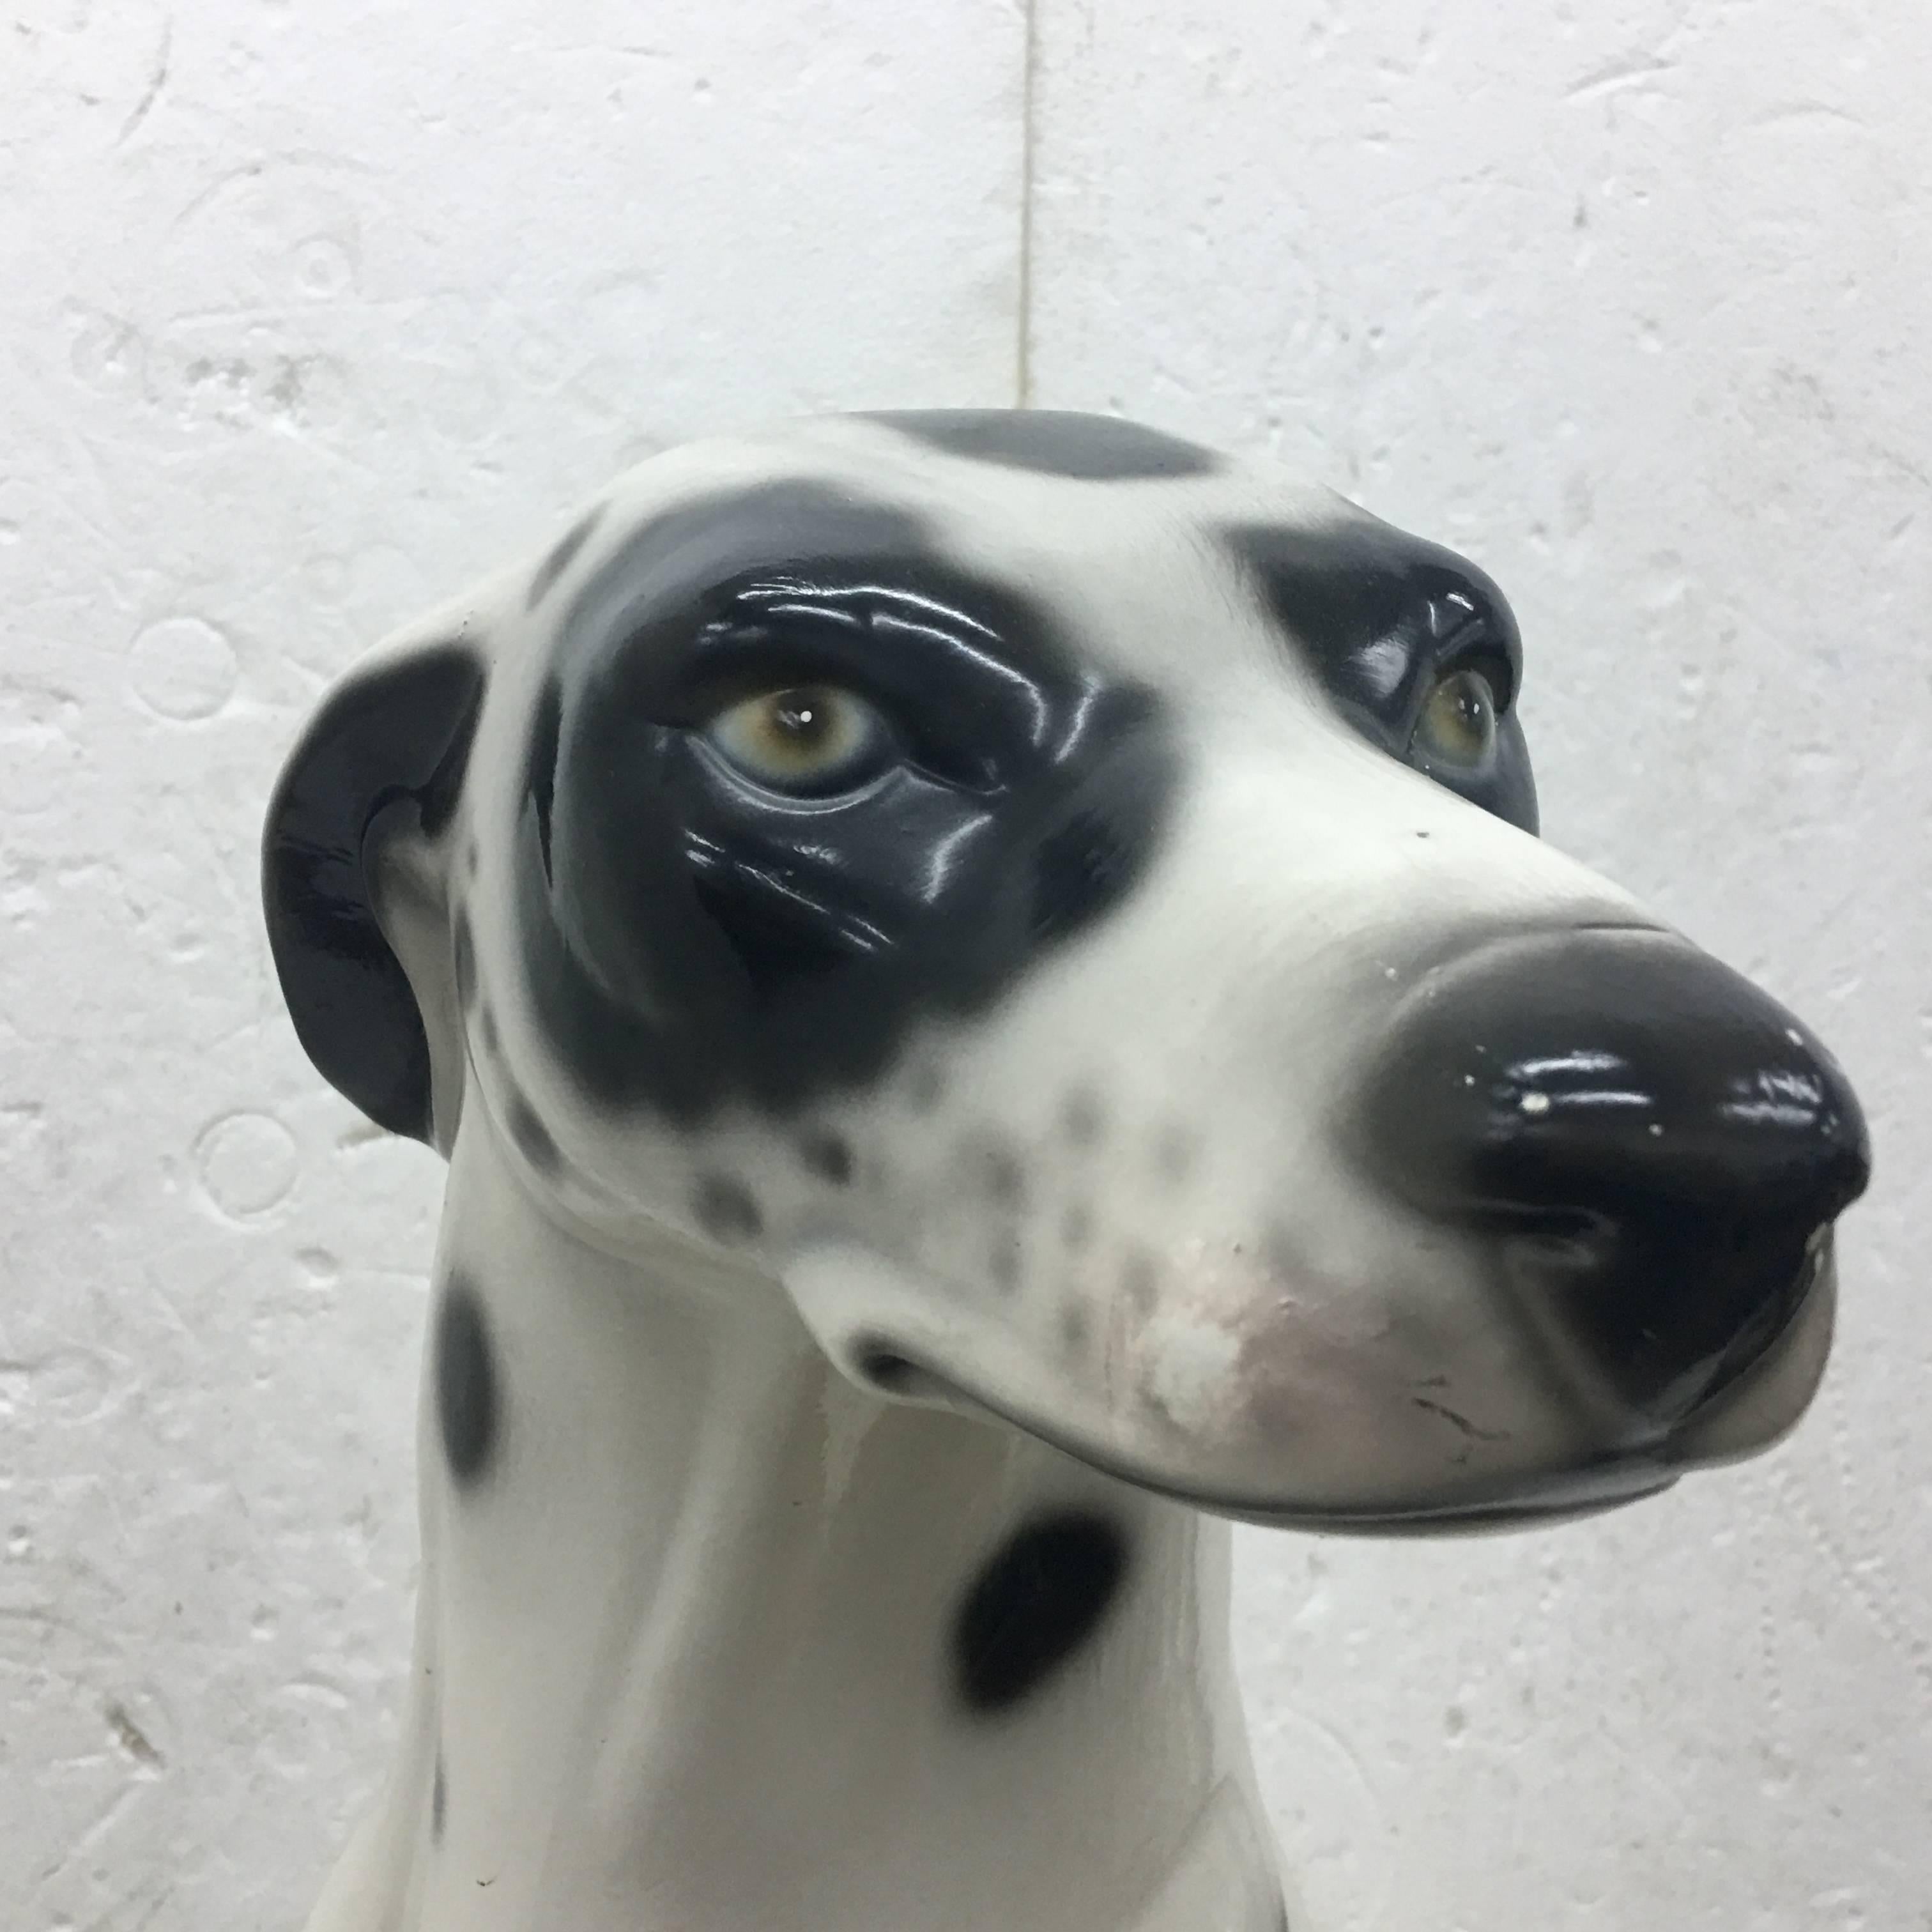 Italian ceramic white and black pointer, in perfect conditions.